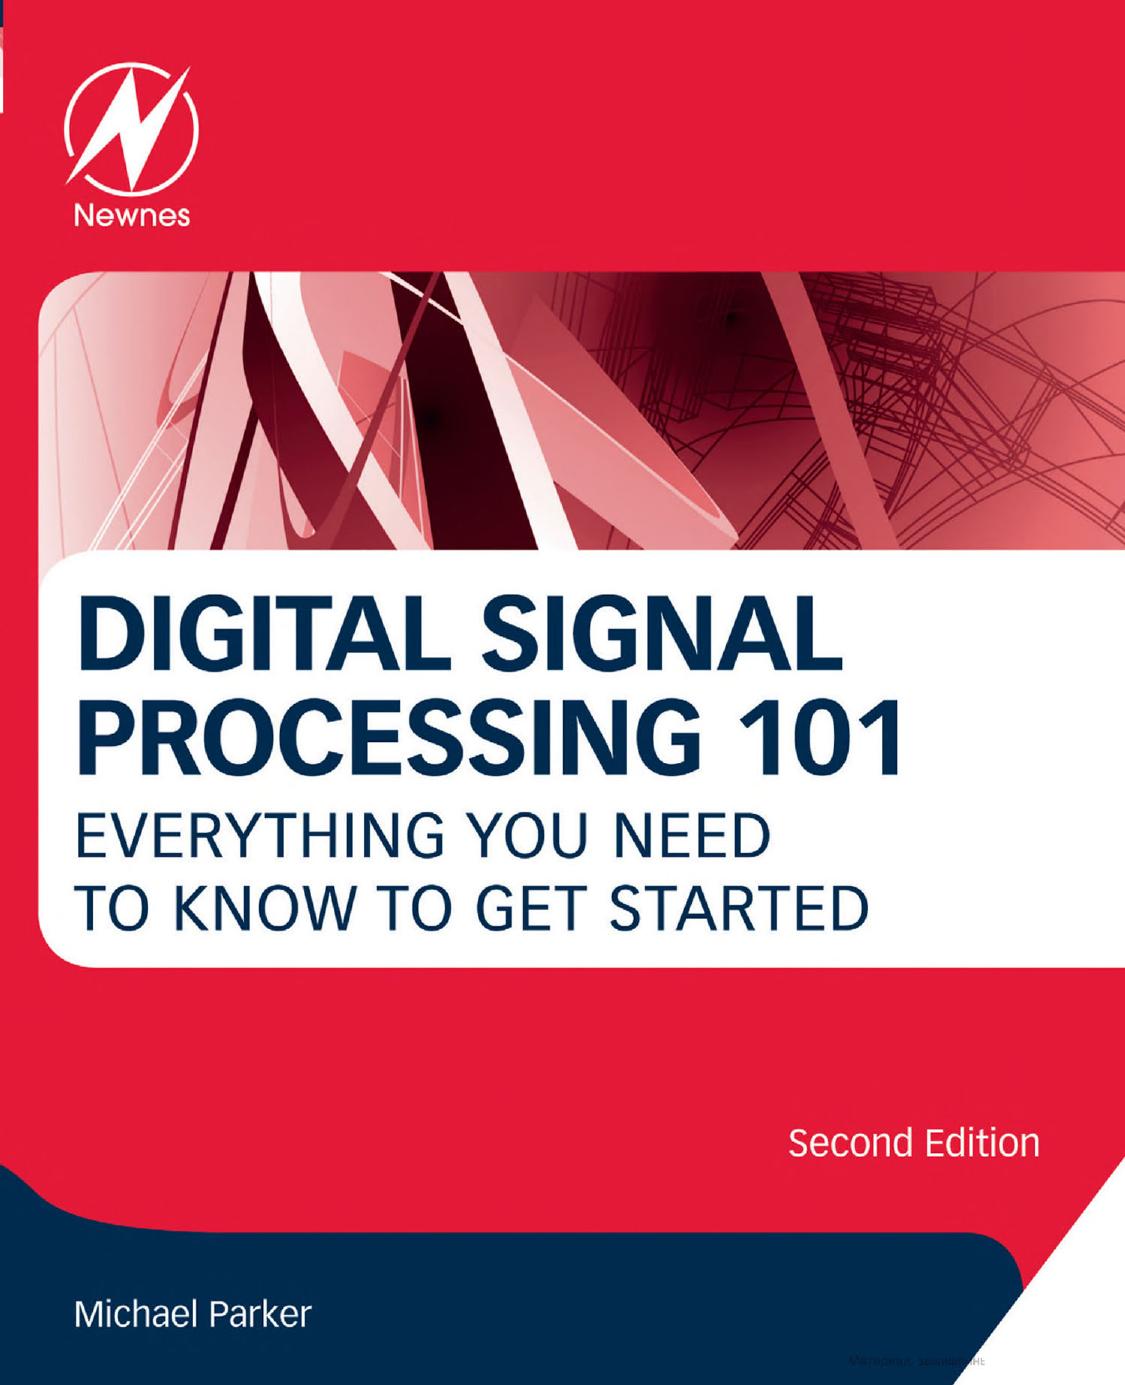 Parker by Digital Signal Processing 101 Everything You Need to Know to Get Started-Newnes (2017)